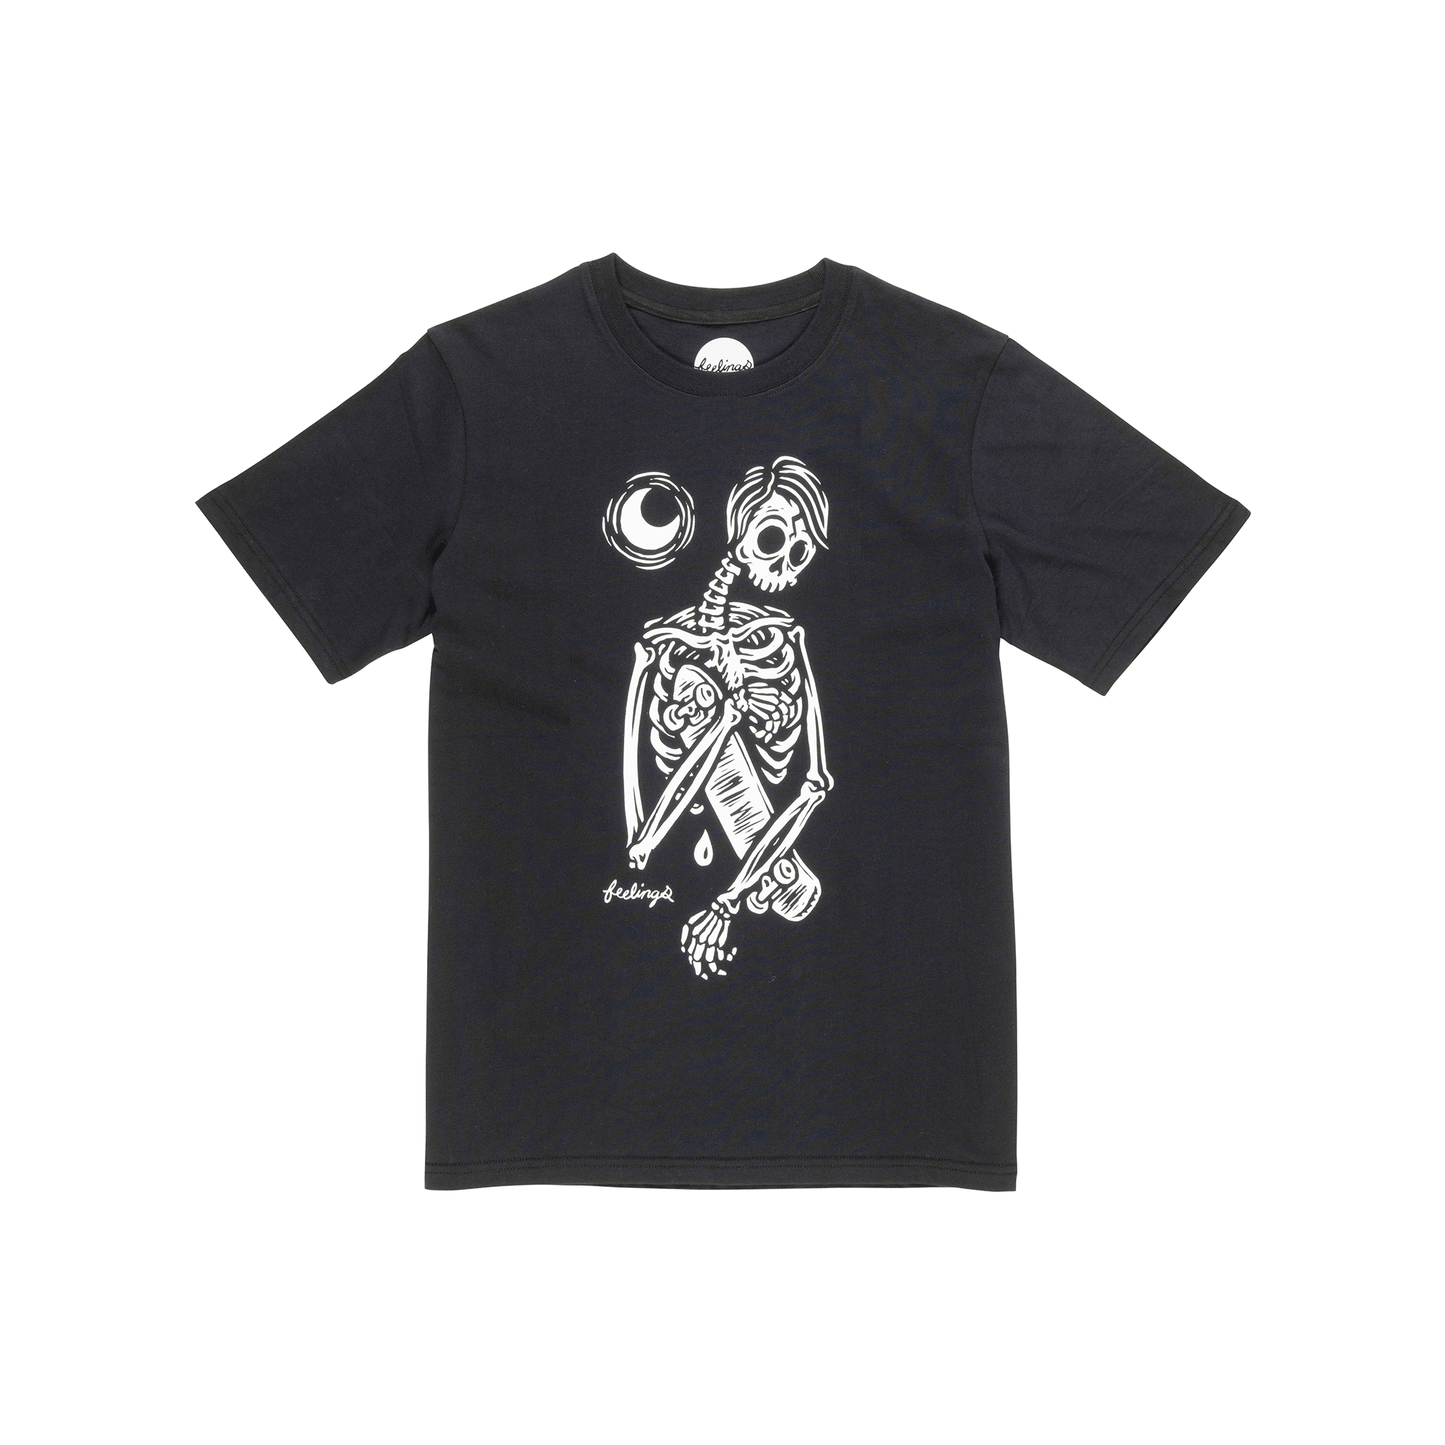 By The Moon Tee Shirt